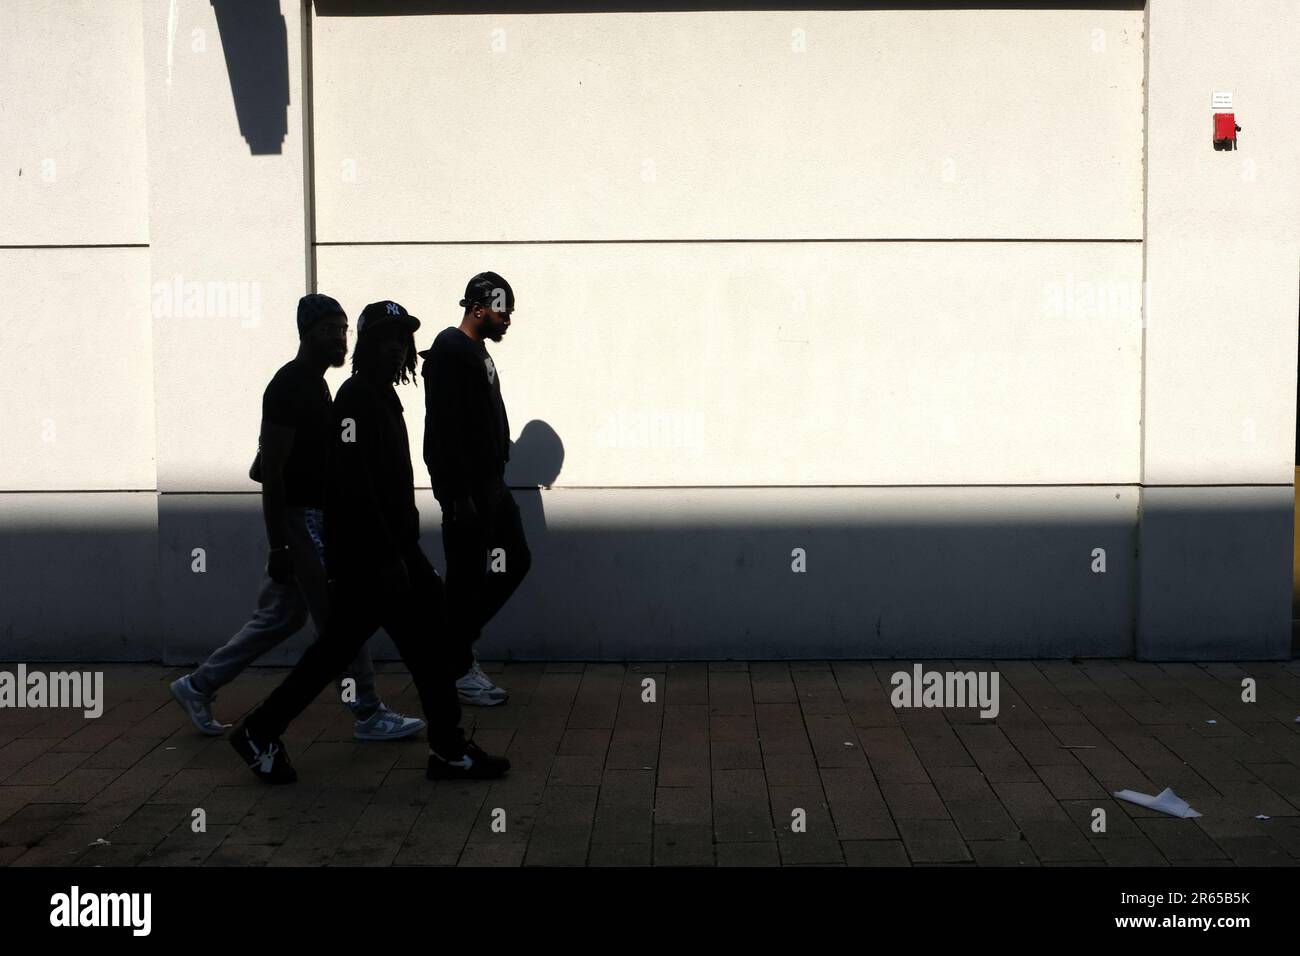 Three male, men, figures, walking together down a high street. Stock Photo